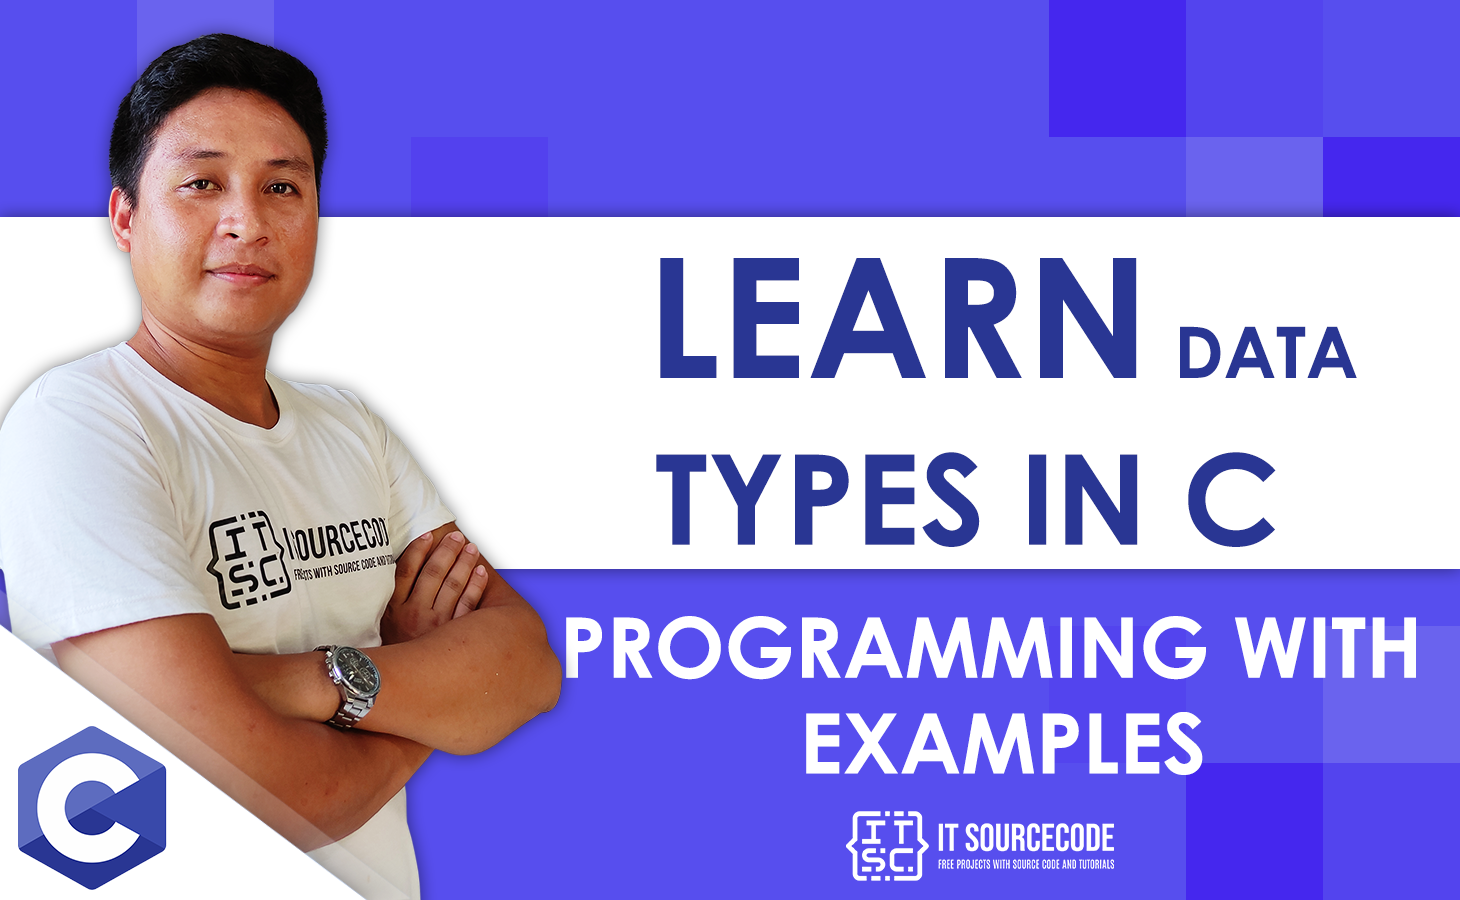 Learn Data Types in C Programming With Examples